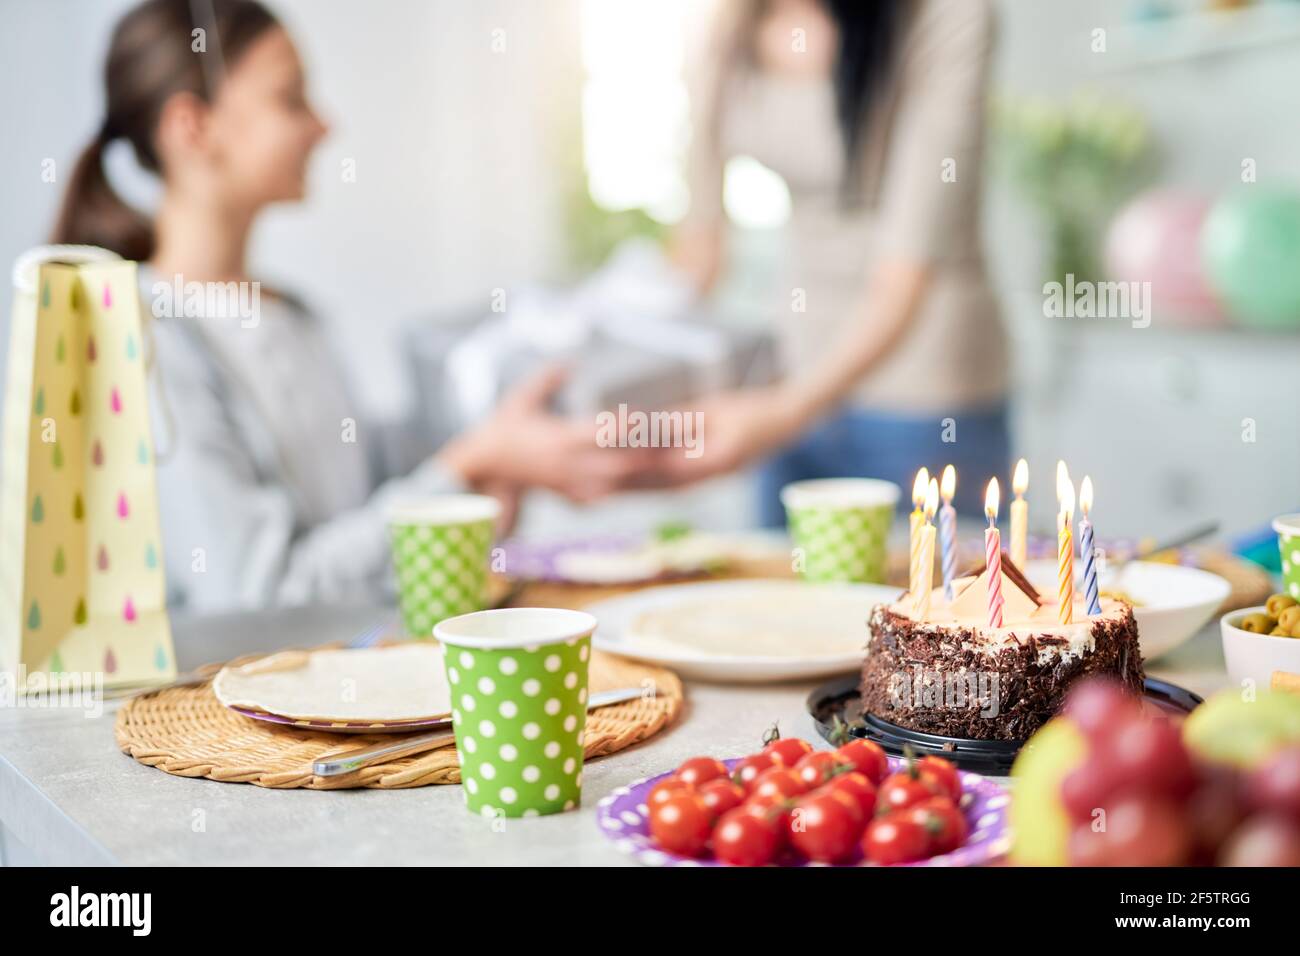 Greetings. Close up of a birtday cake on the table. Mother giving present to her daughter, celebrating birthday in the background Stock Photo